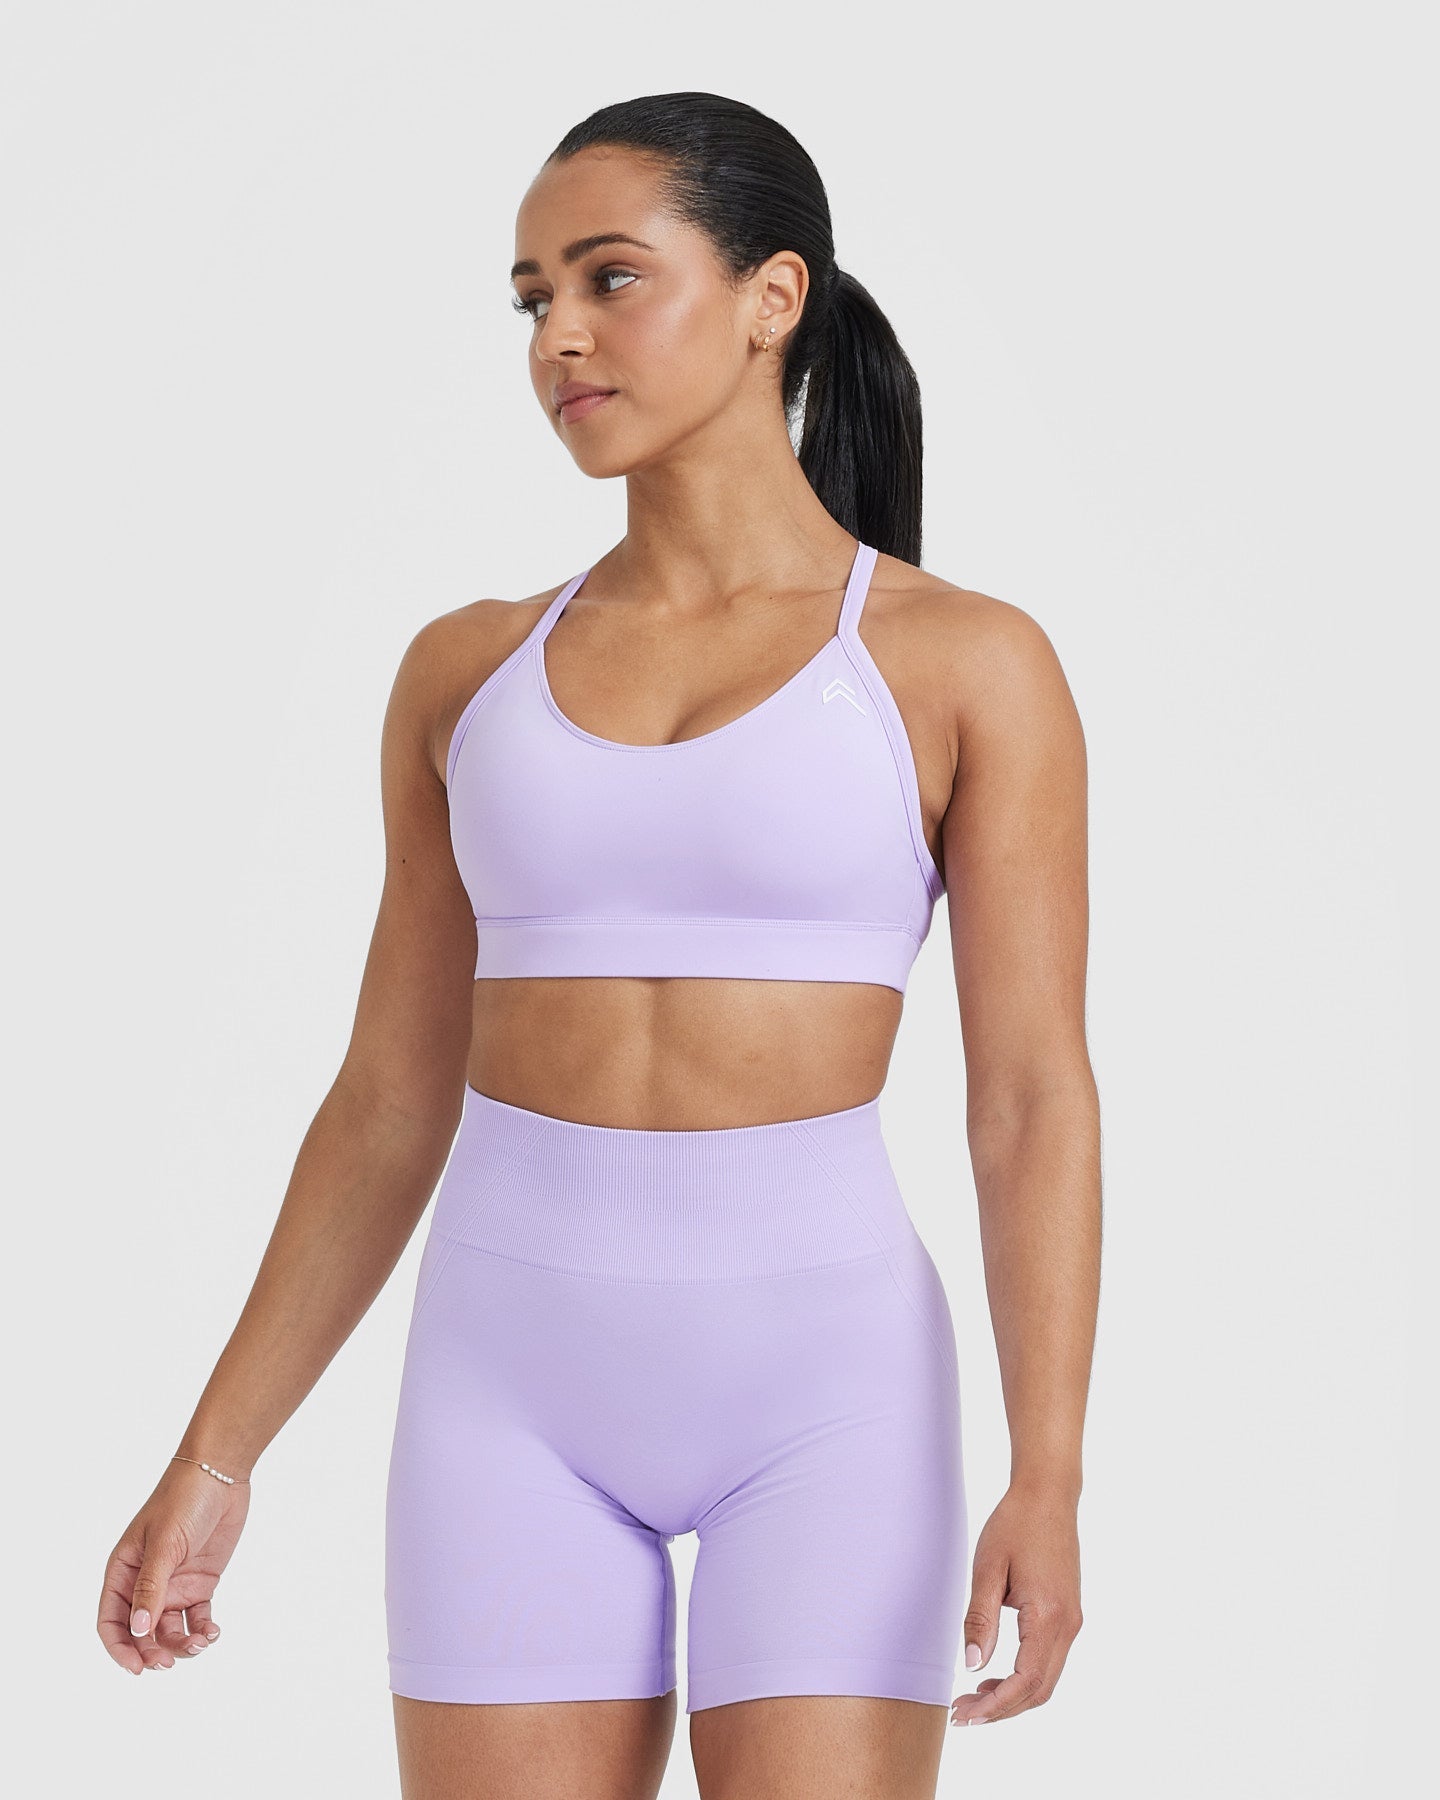 Old Navy Active Lavender Seamless Wirefree Sports Bra Size Large